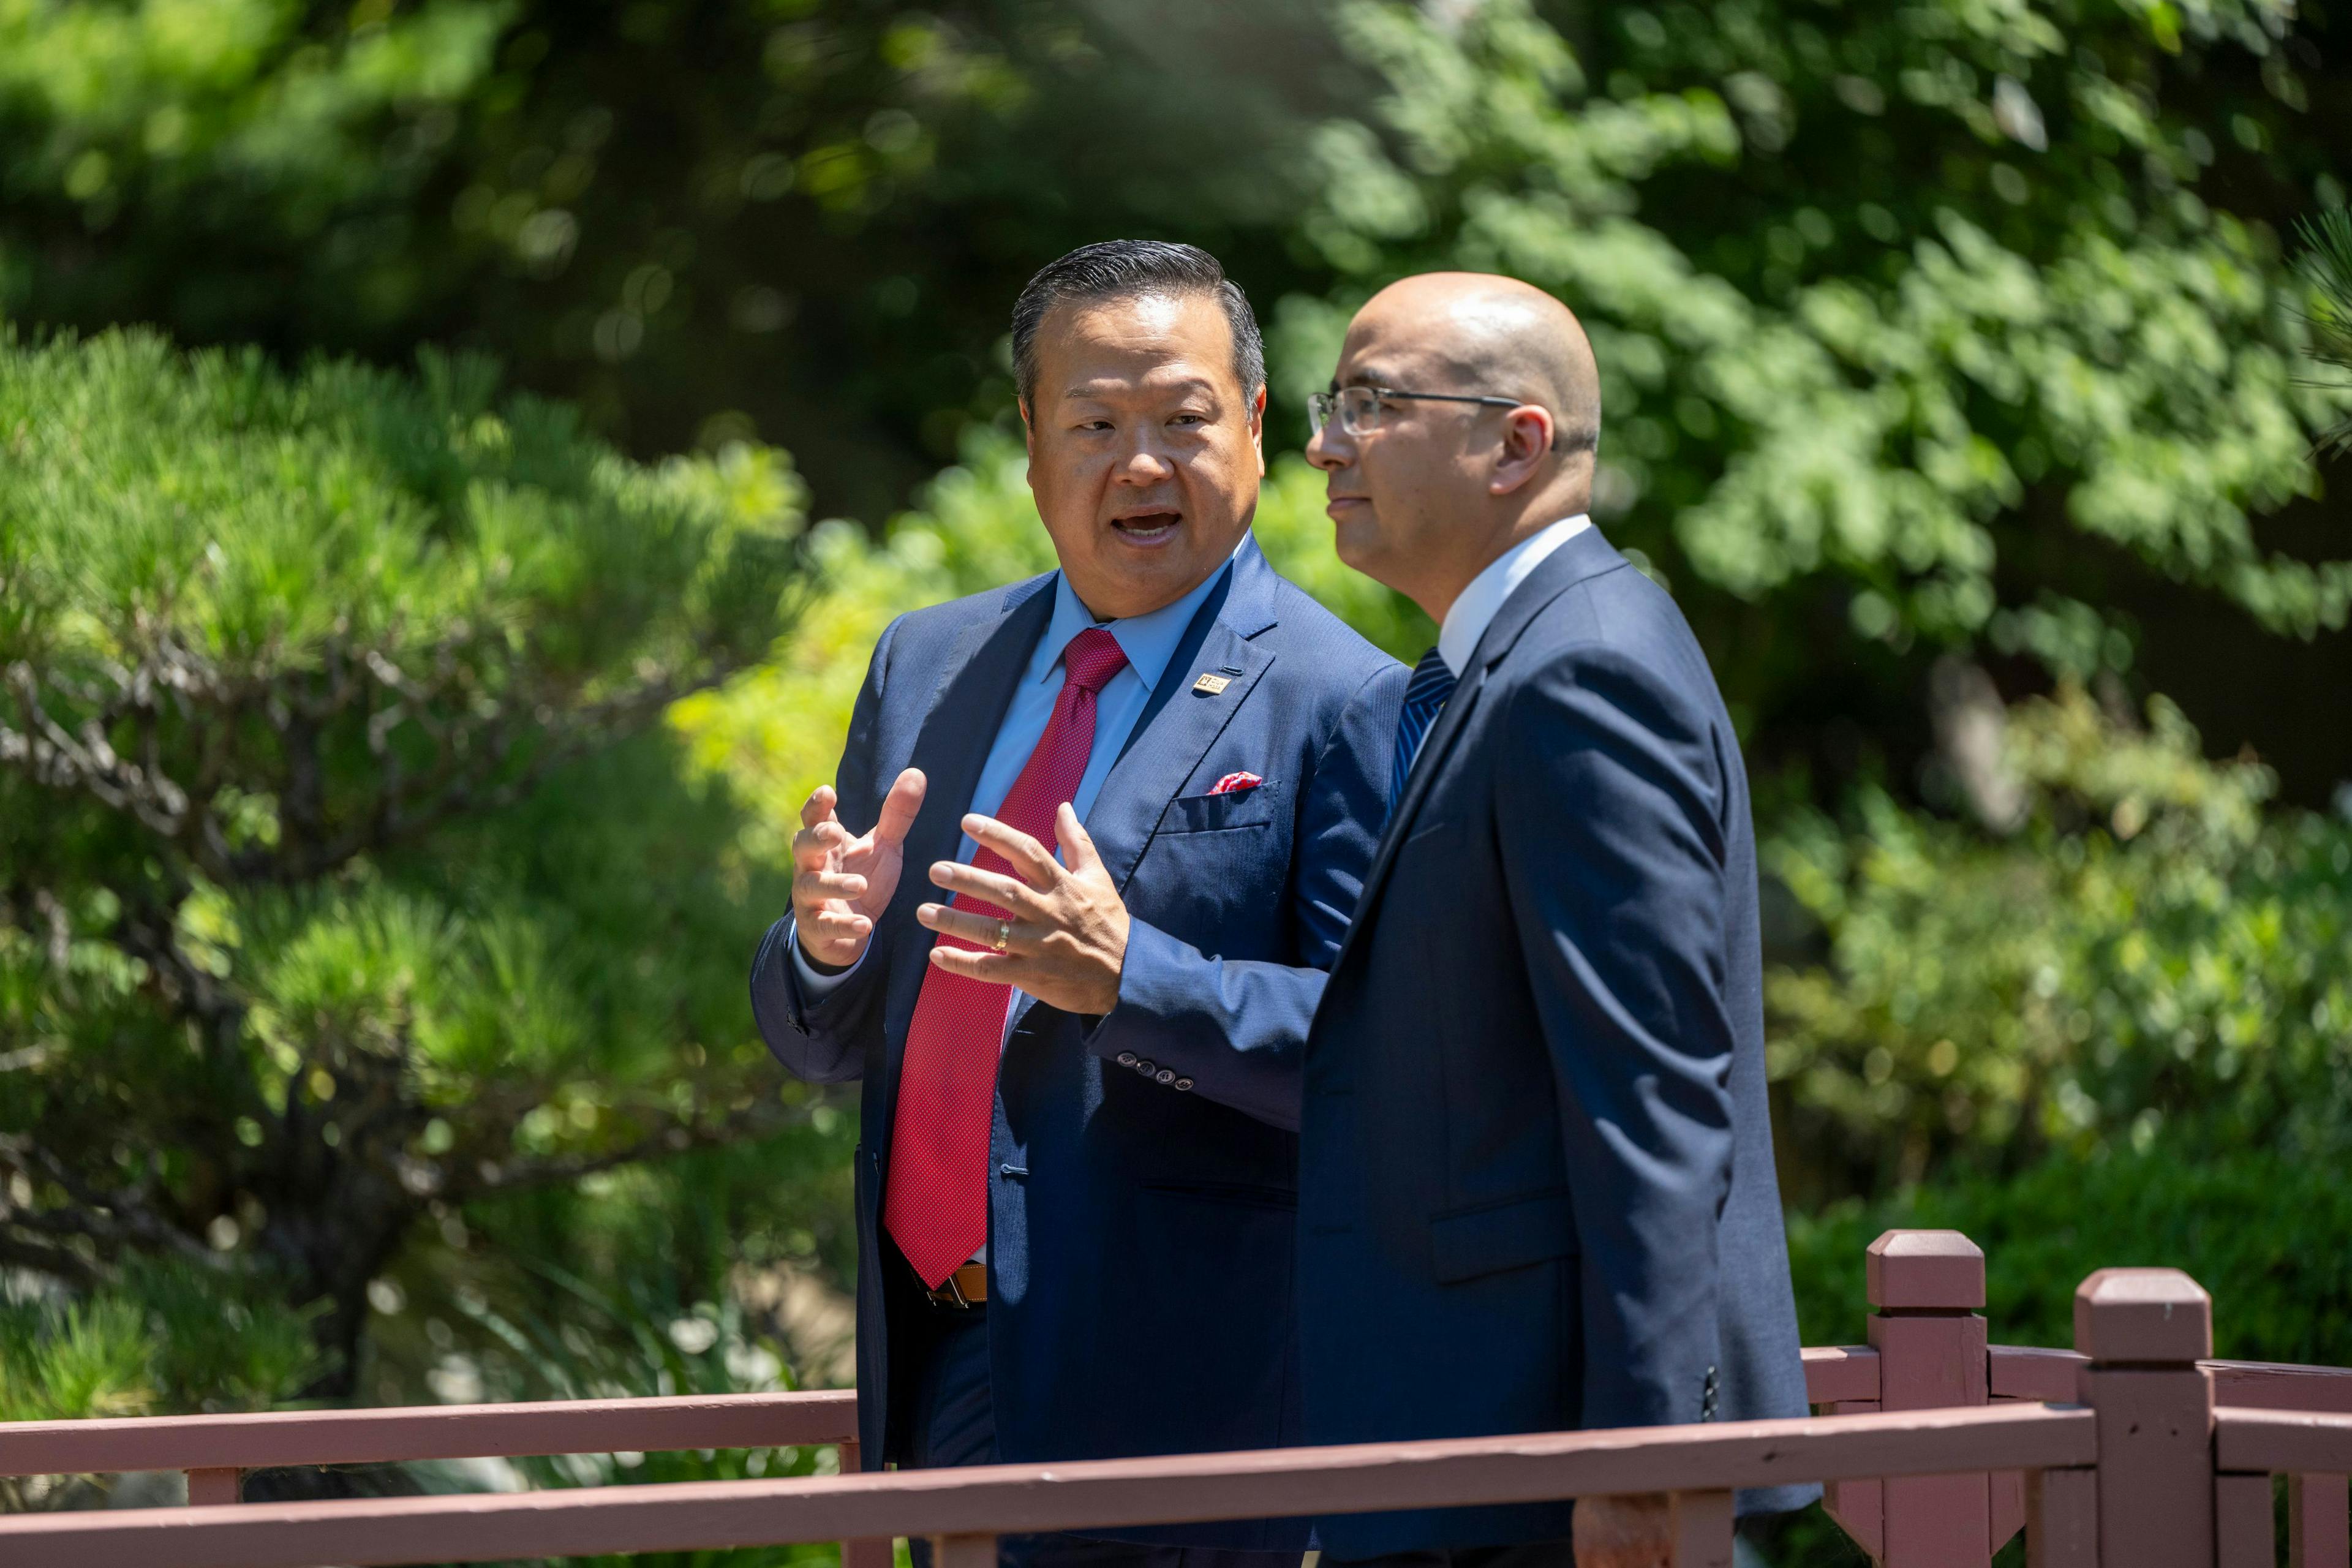 Dr. Richard T. Lee and Dr. Edward Kim talking on a scenic outdoor footbridge